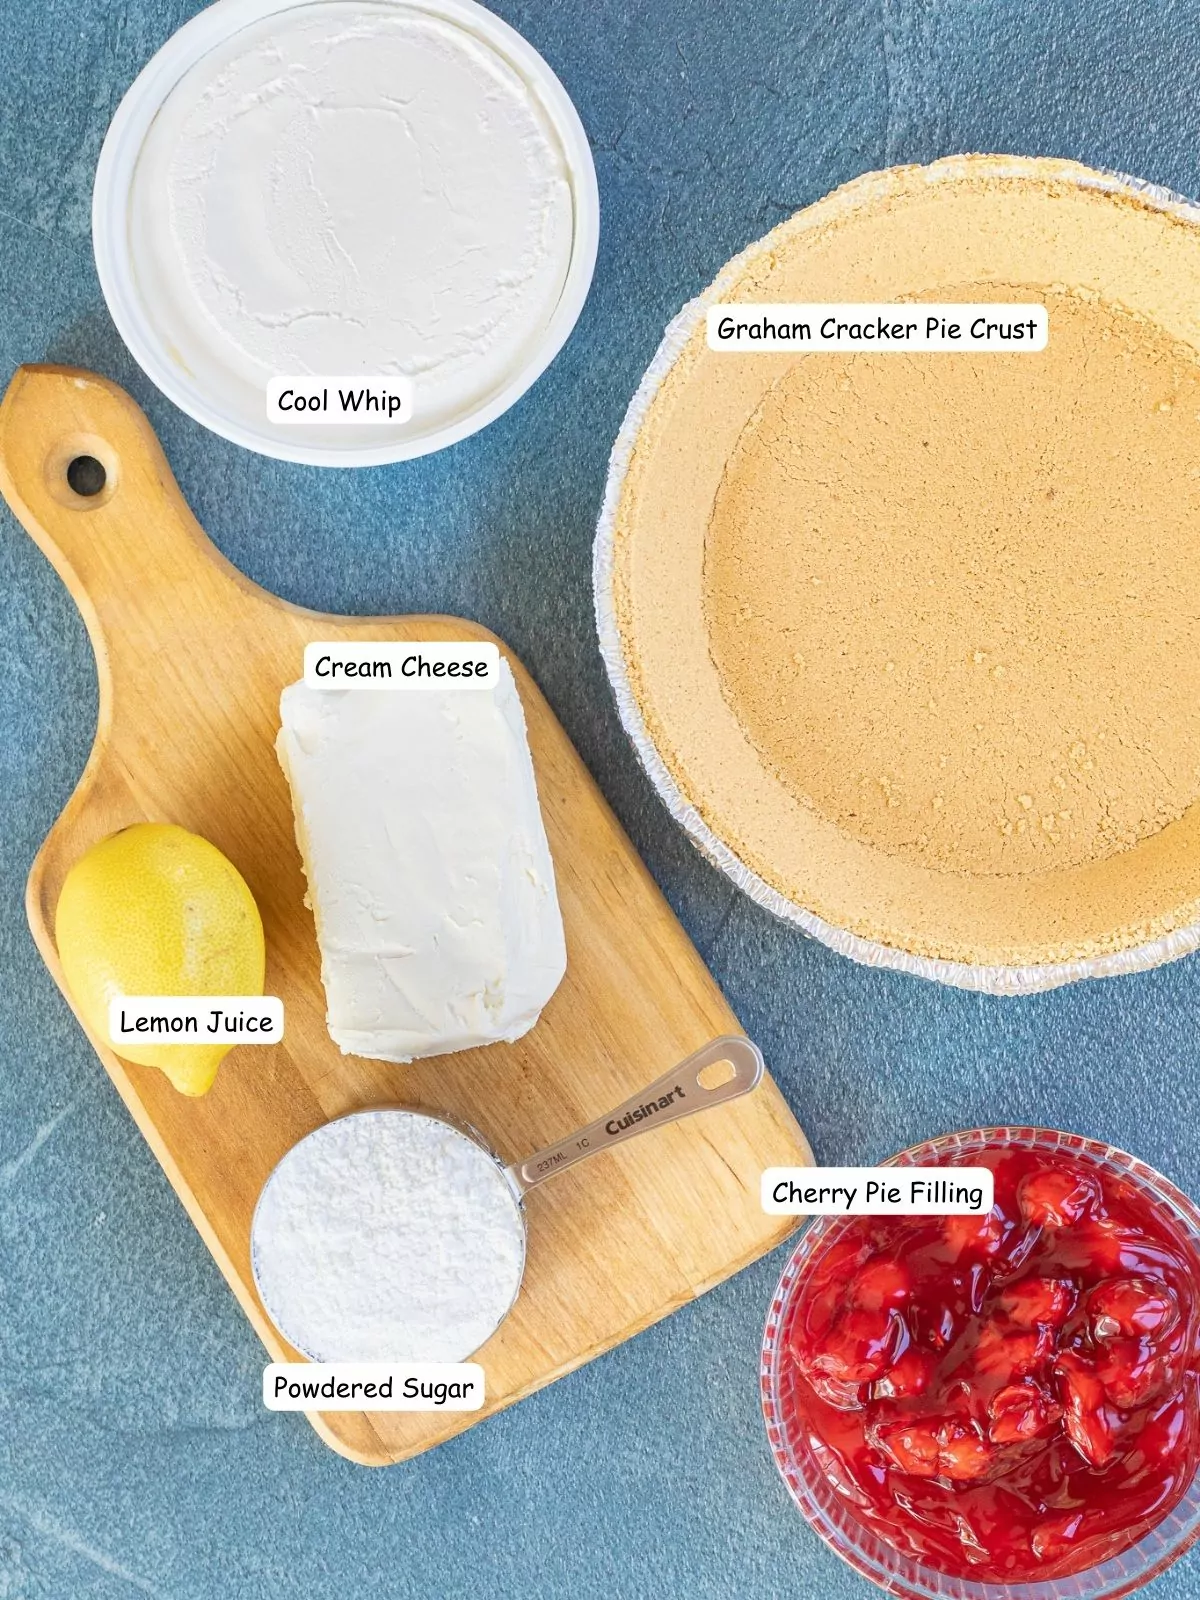 Ingredients for no bake cheesecake pie with cherry pie filling.